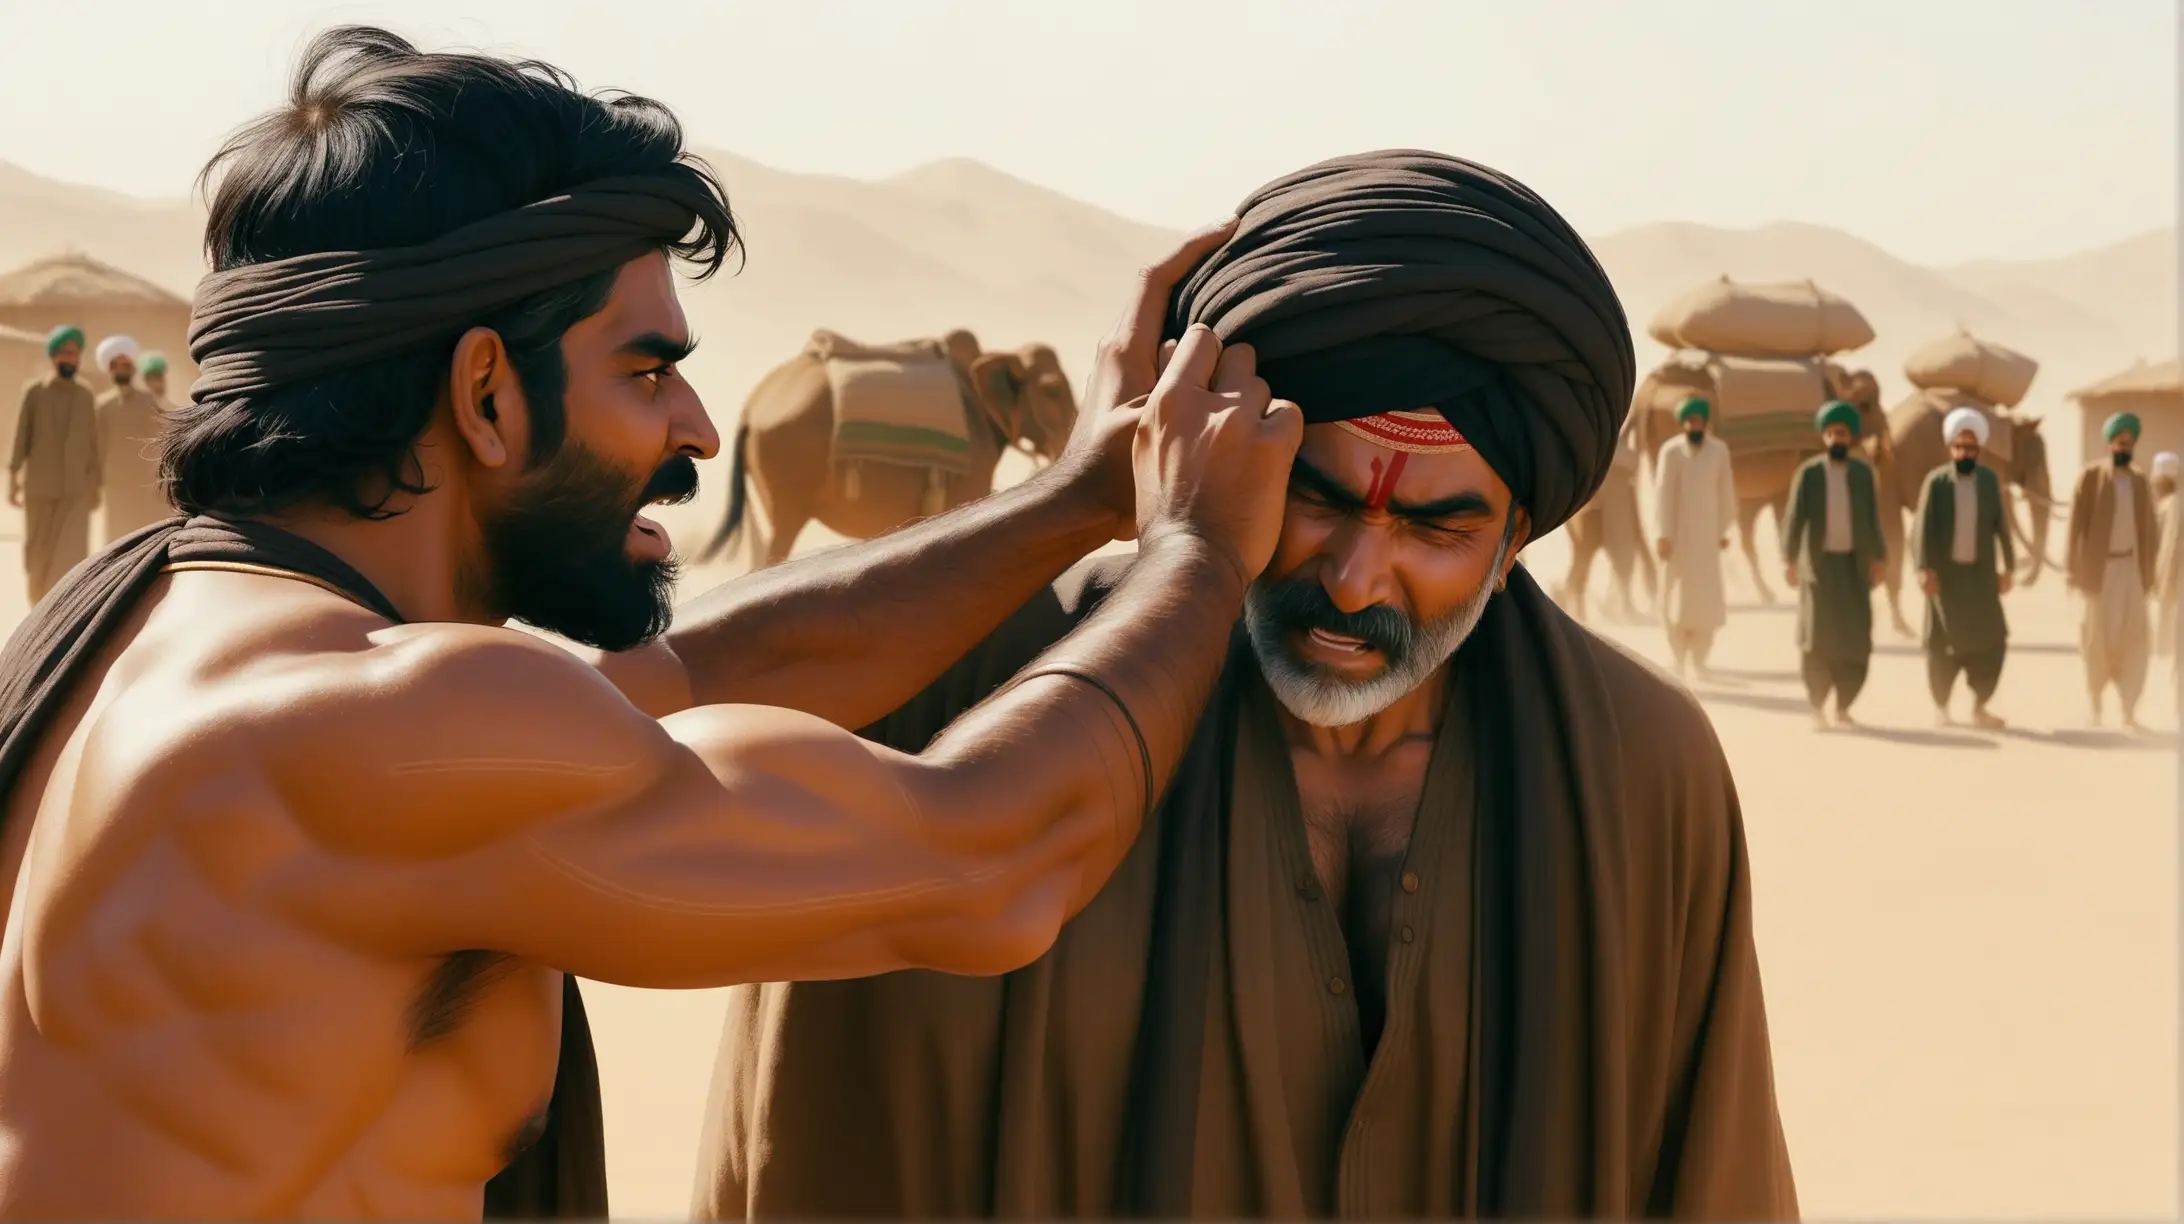 cinematic, a tribal Iranian man slapping an Indian man on his face